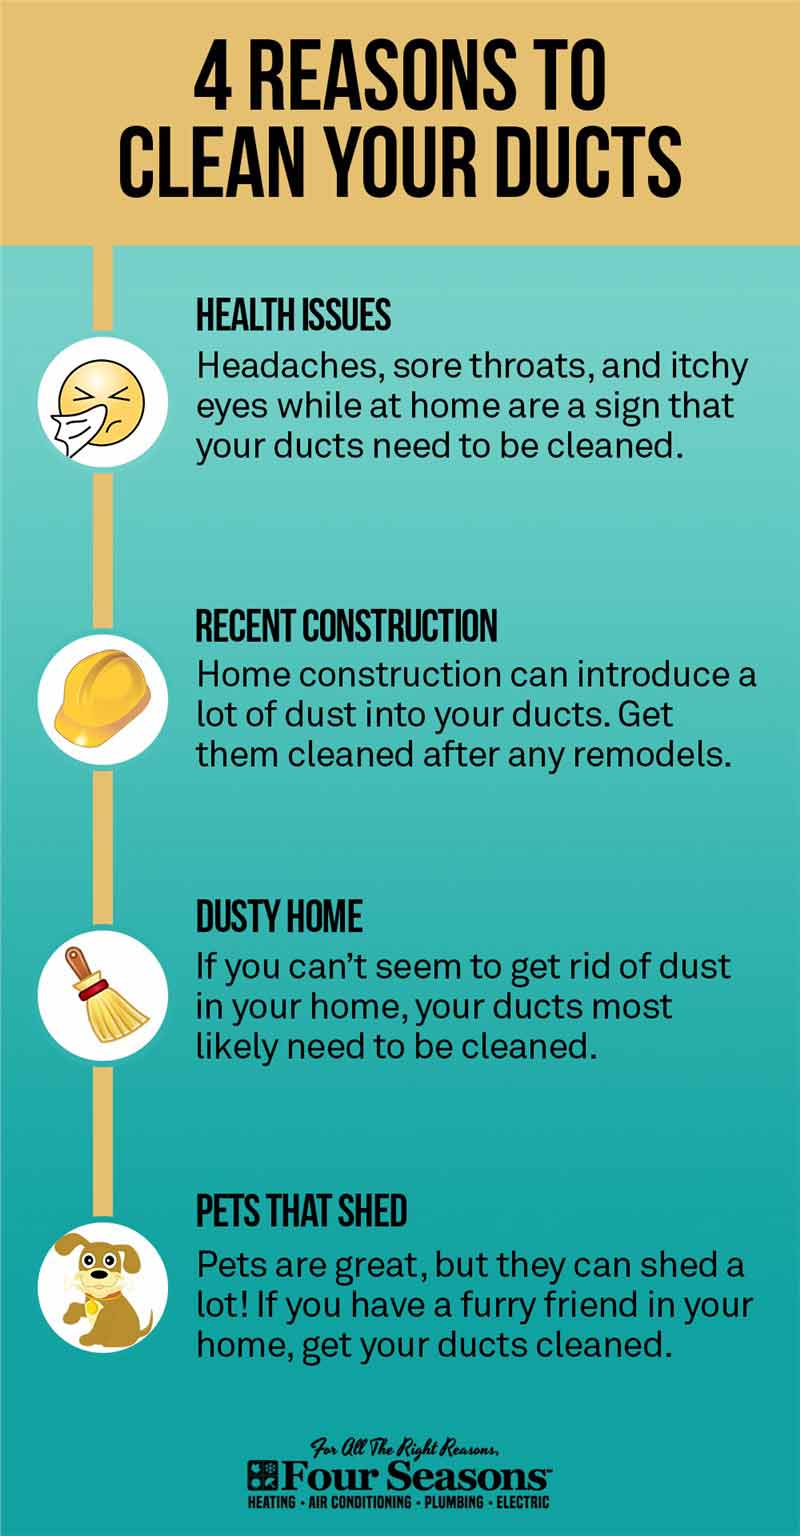 4 reasons to clean your ducts